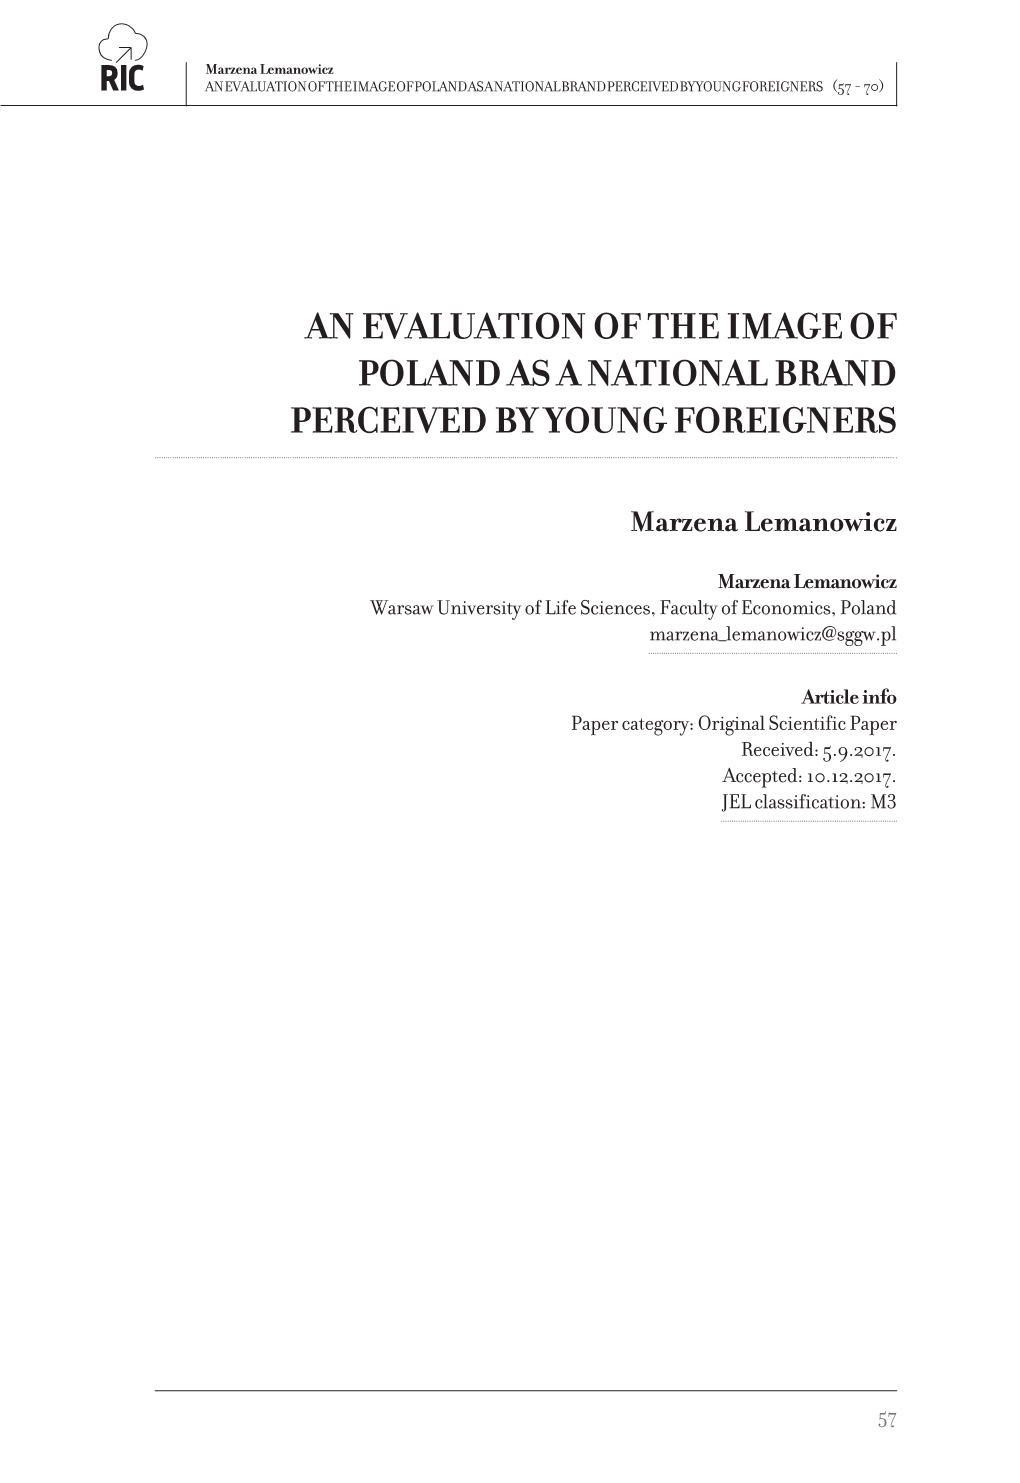 An Evaluation of the Image of Poland As a National Brand Perceived by Young Foreigners (57 - 70)